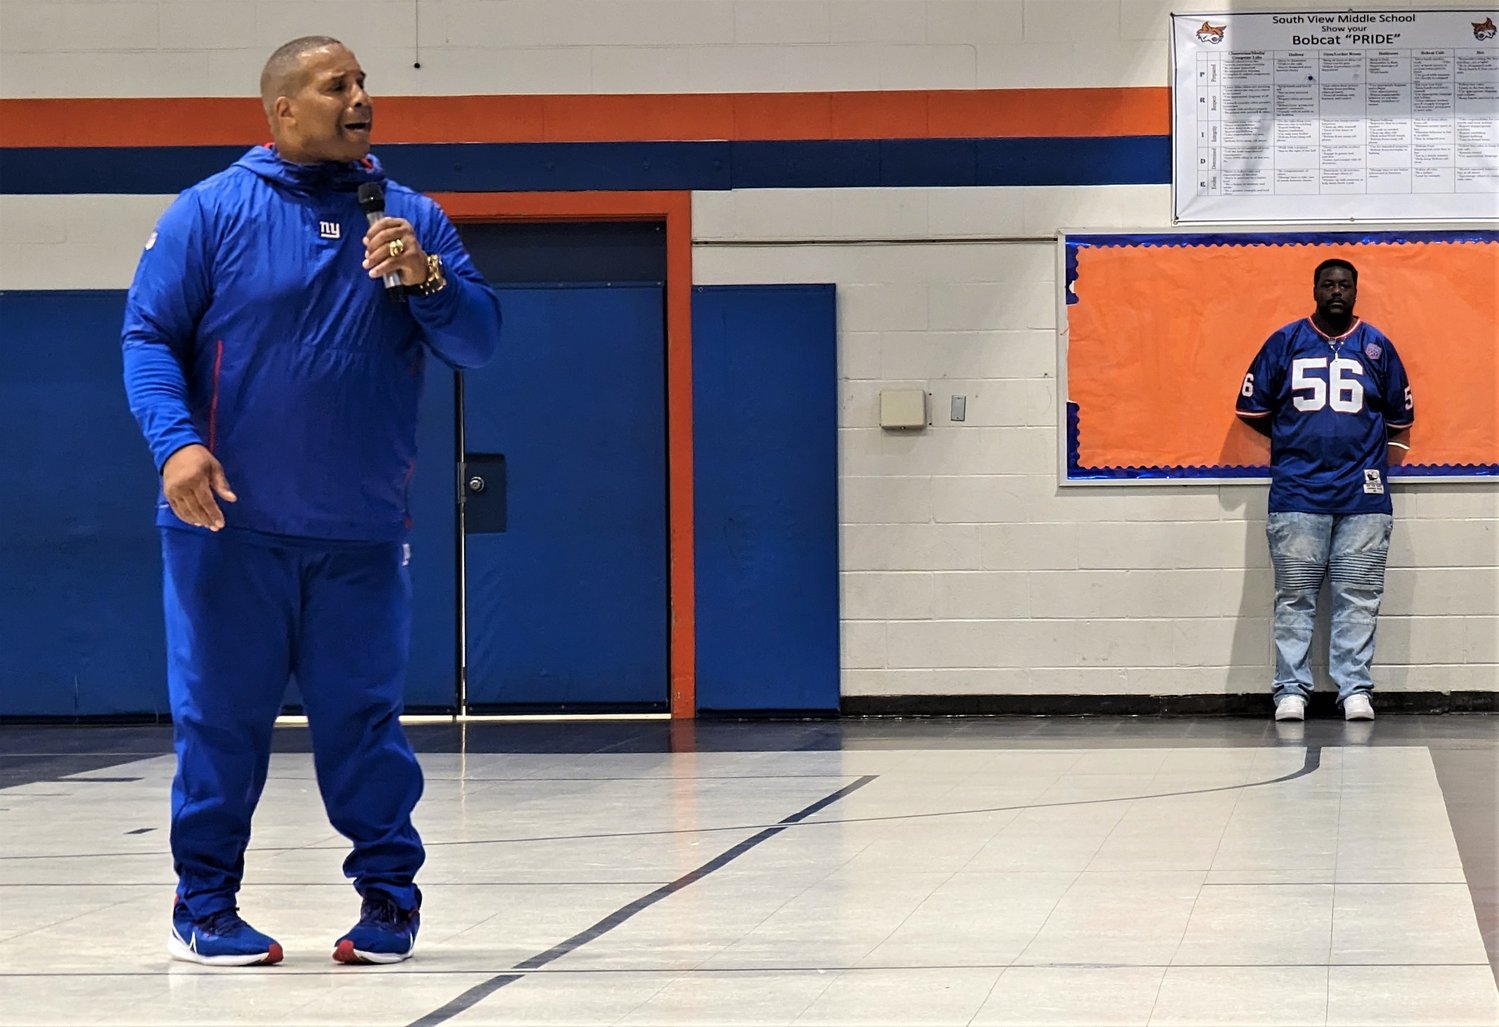 Former NFL player and now inspirational speaker Keith Davis speaks to South View Middle School students on Wednesday in Hope Mills. The title of Davis’ speech was 'PUSH', an acronym for Persevere Until Success Happens